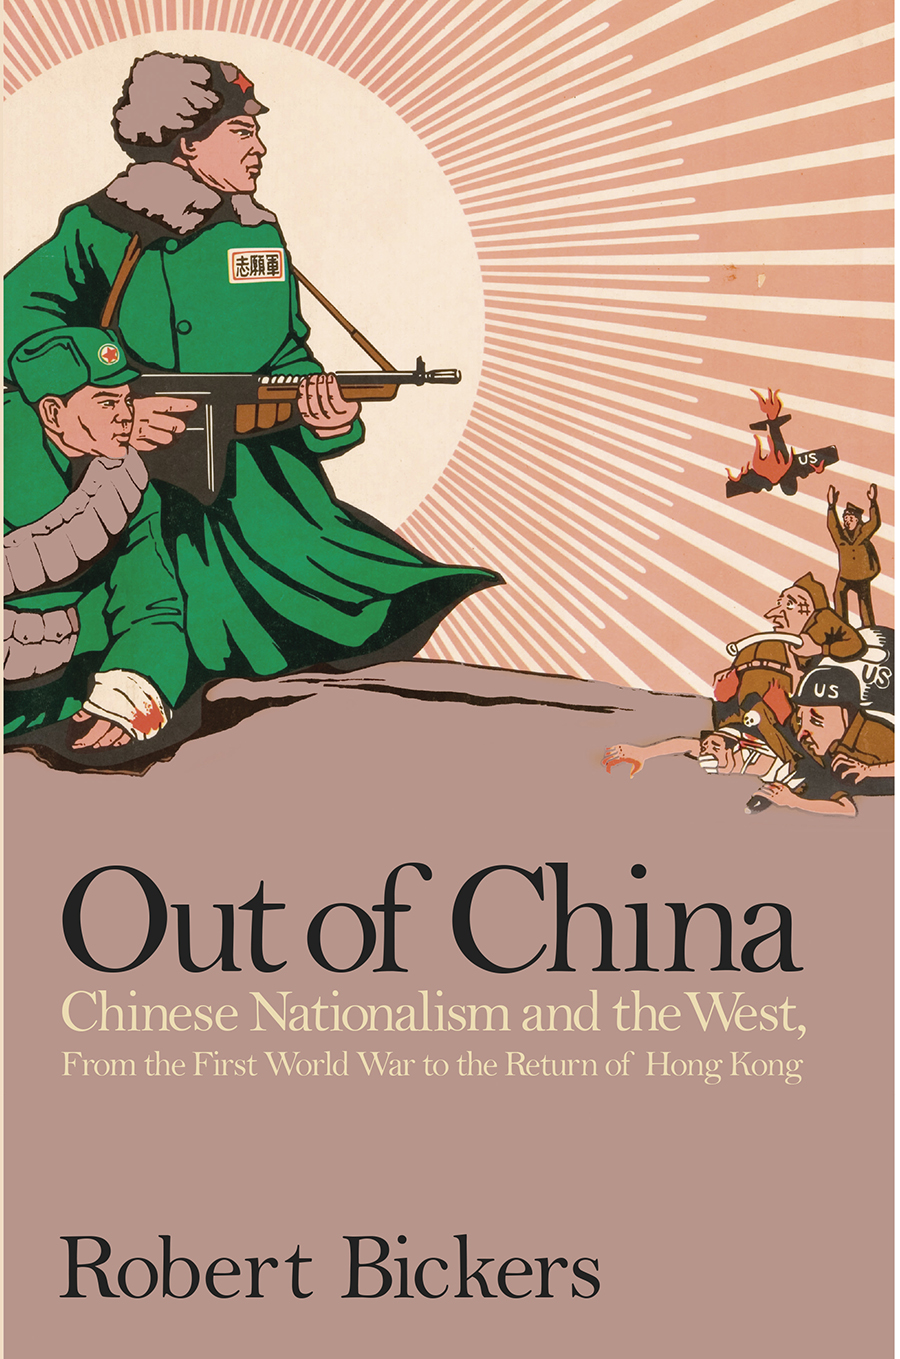 image of the book cover of Out of China by Robert Bickers, published by Allen Lane featuring a Bridgeman Image on the cover